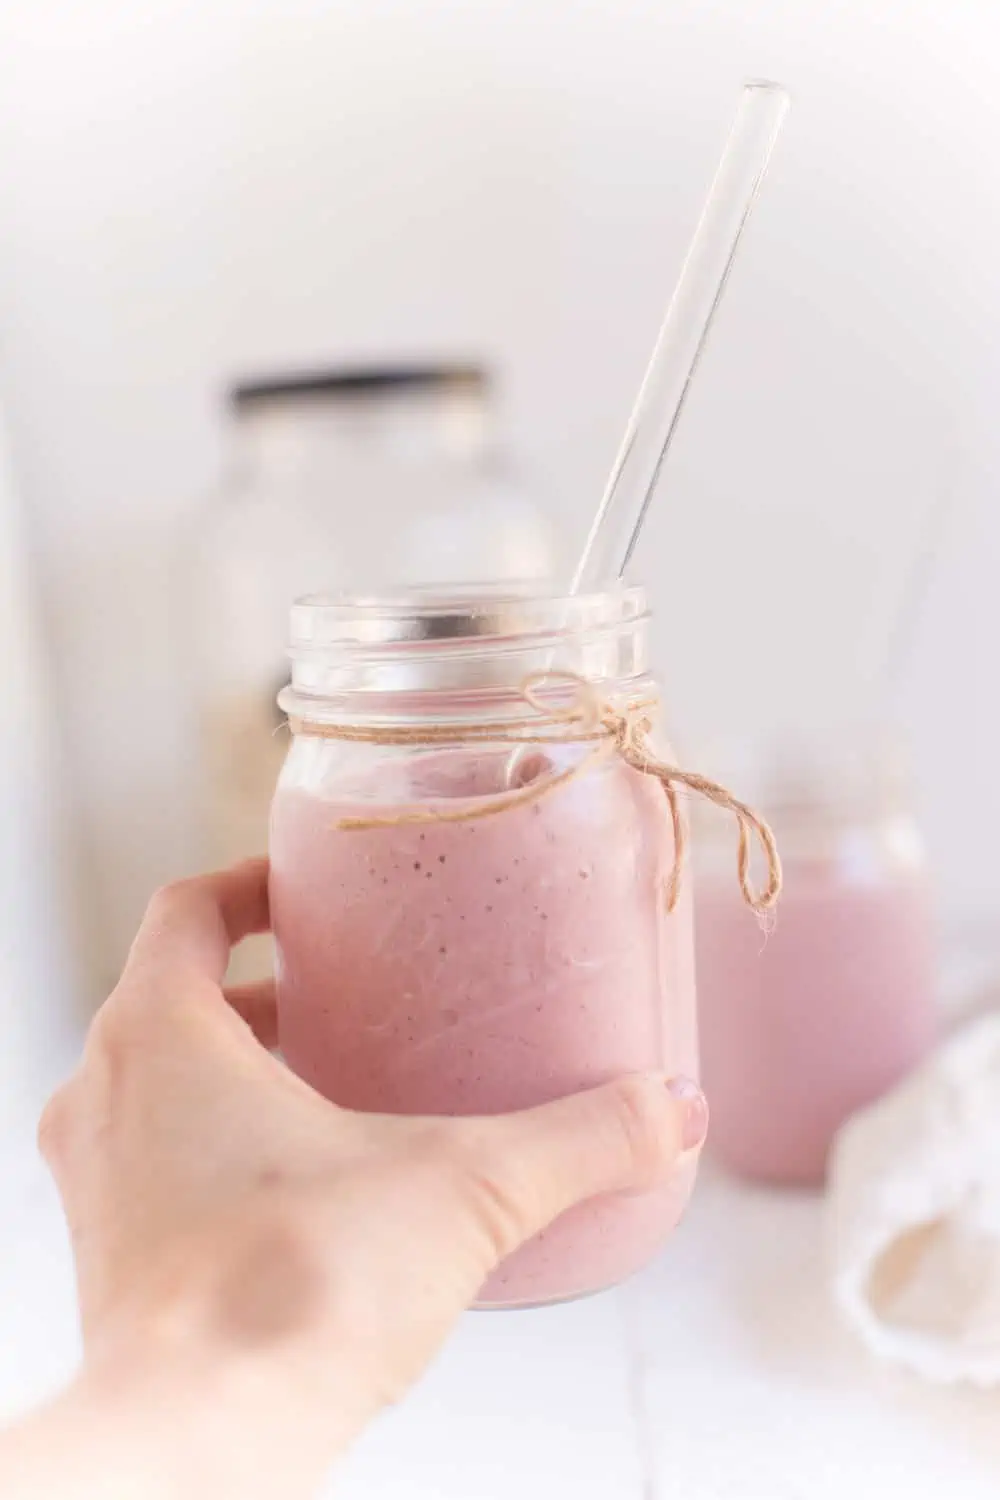 Hand holding a mason jar filled with an almond milk strawberry smoothie made without yogurt.  